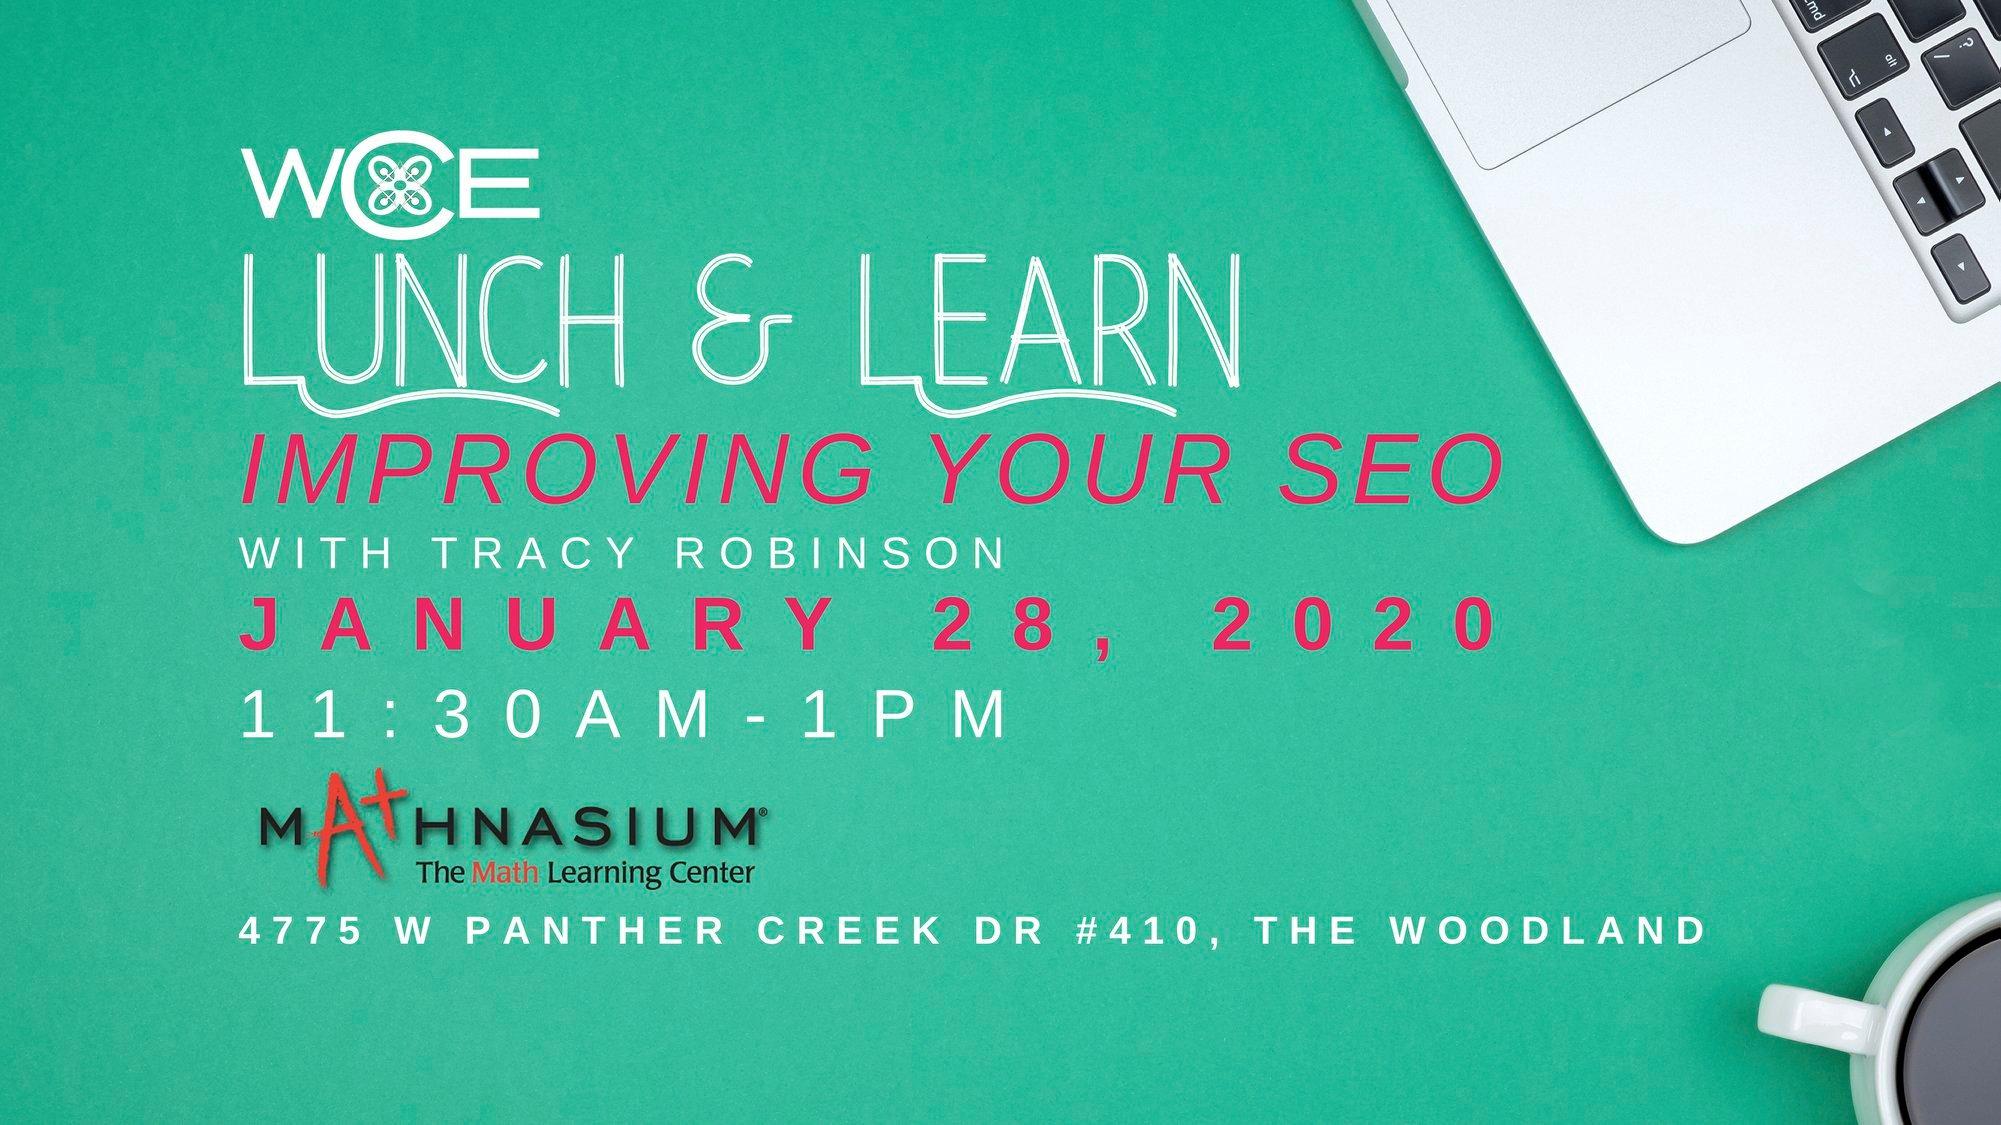 Women's Council of Entrepreneurs Lunch and Learn on Improving your SEO